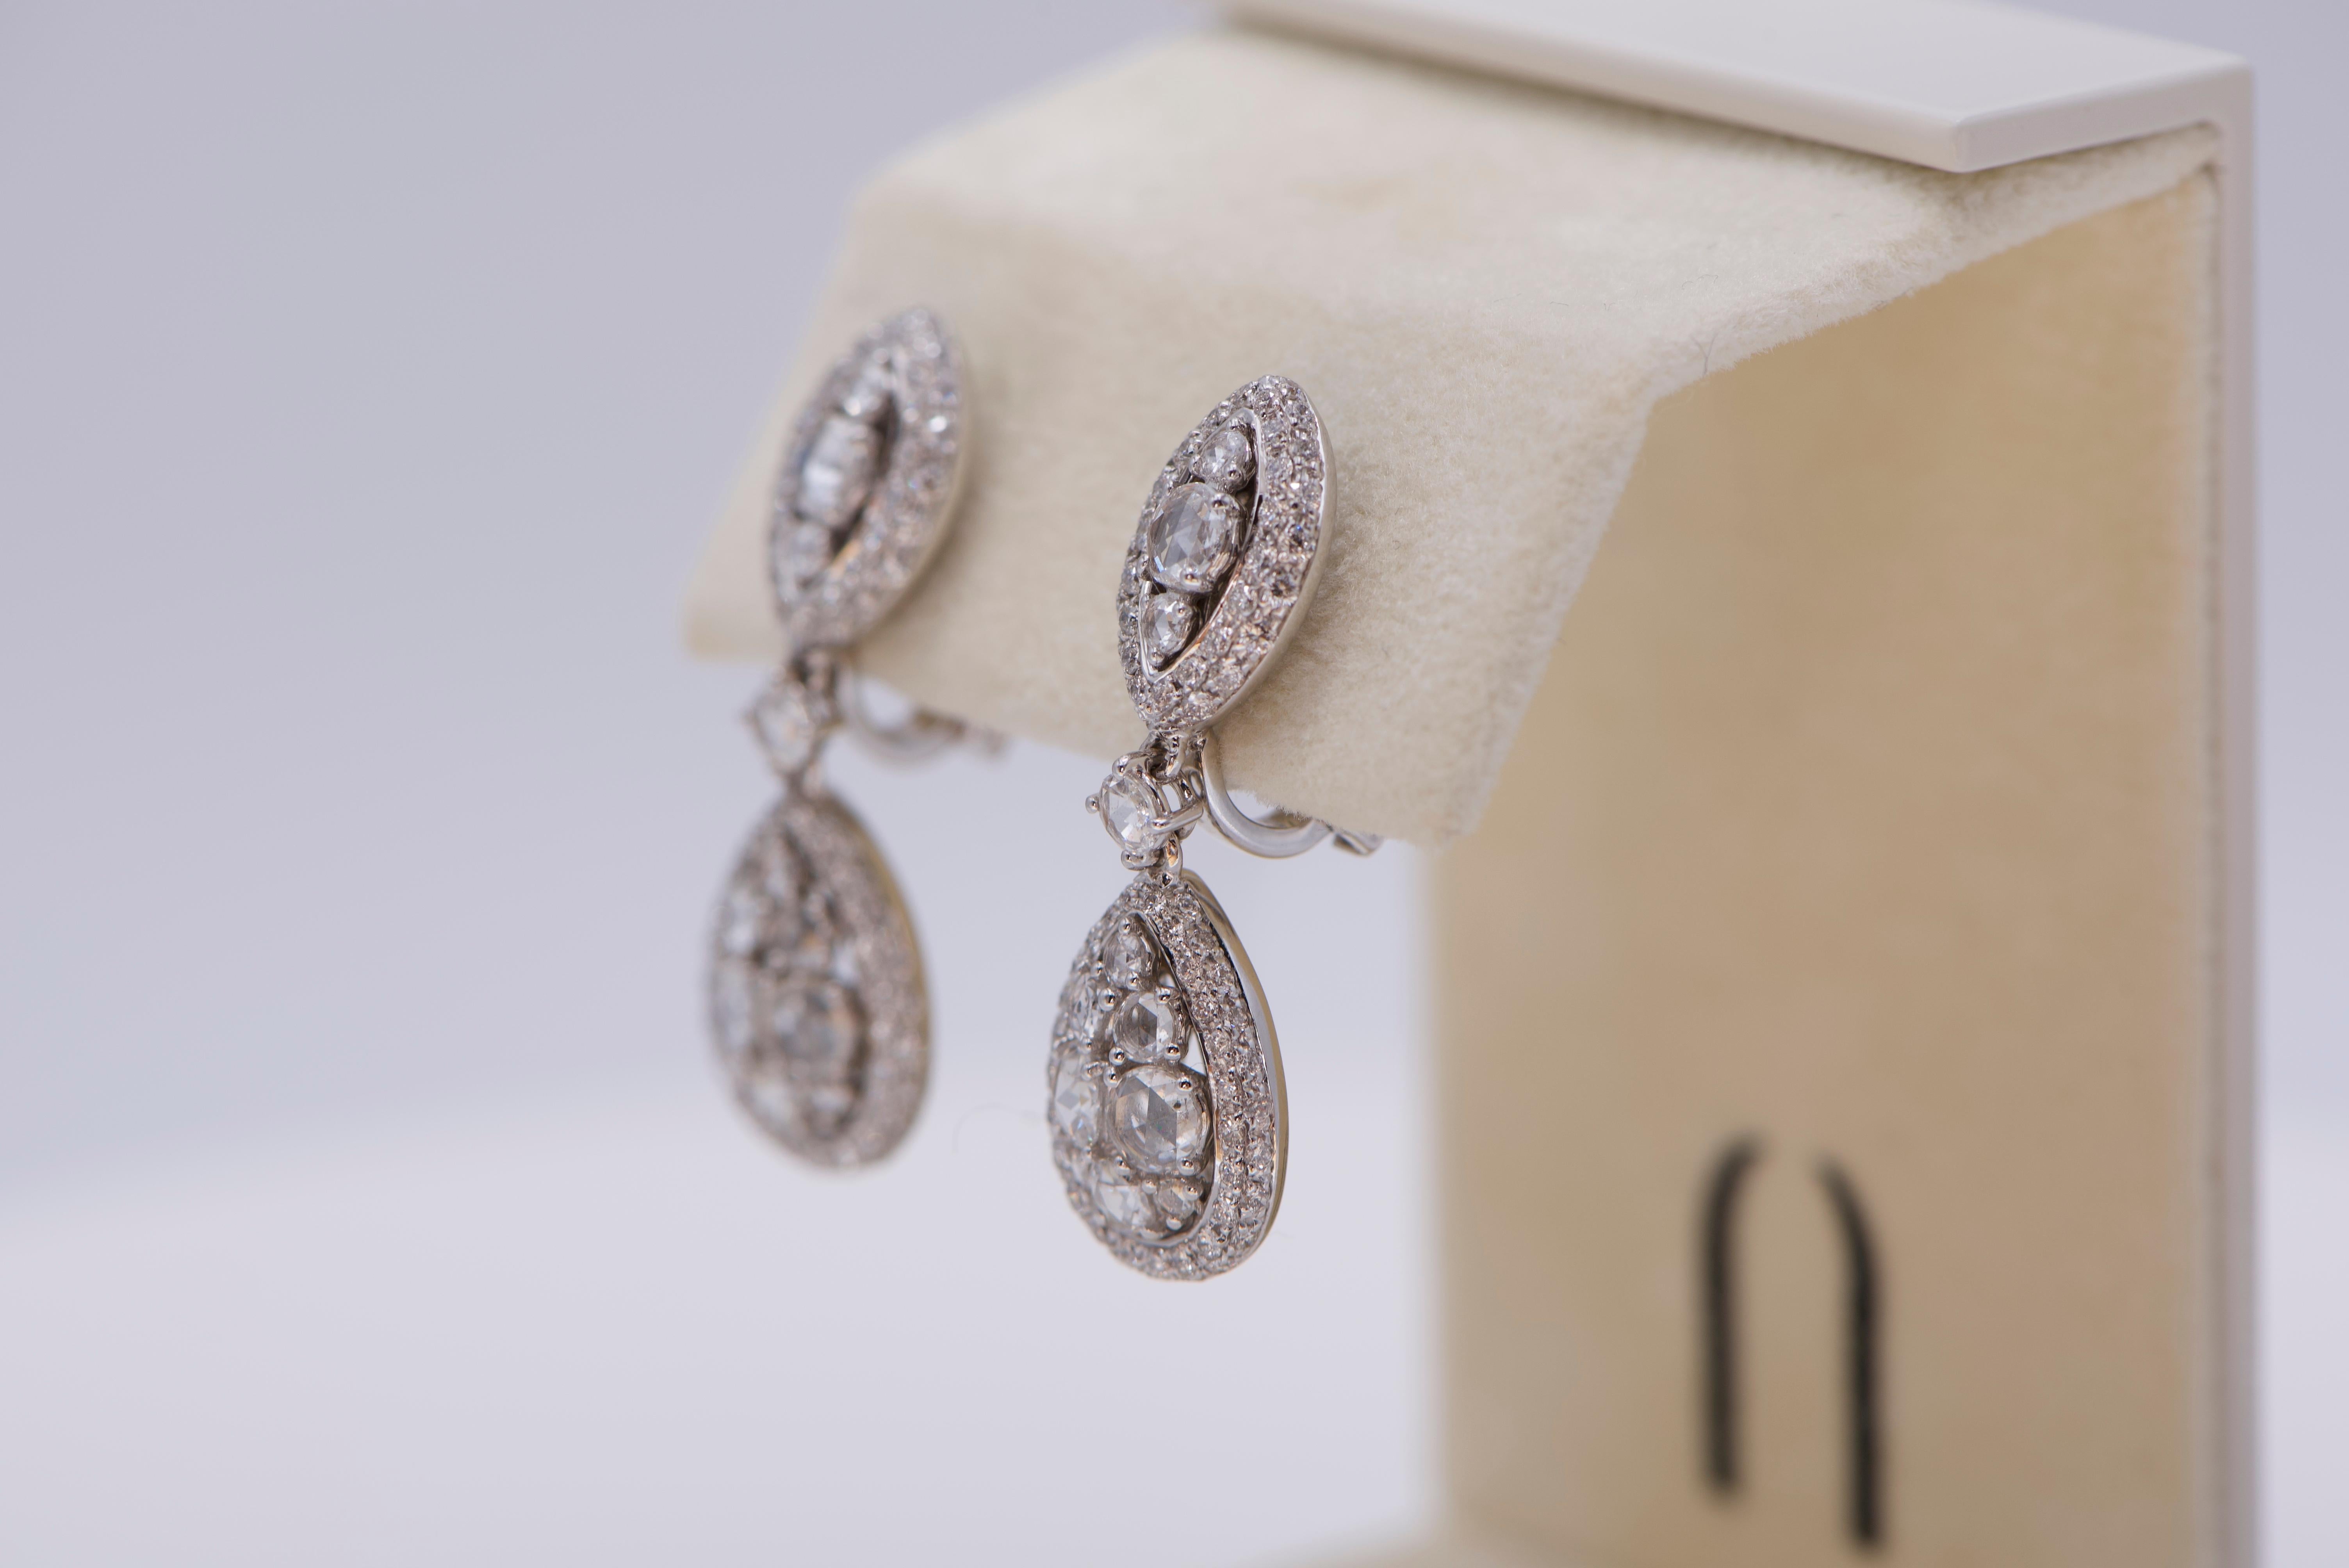 Earrings in 18K white gold with approximately 2.53 carats of white diamonds. 